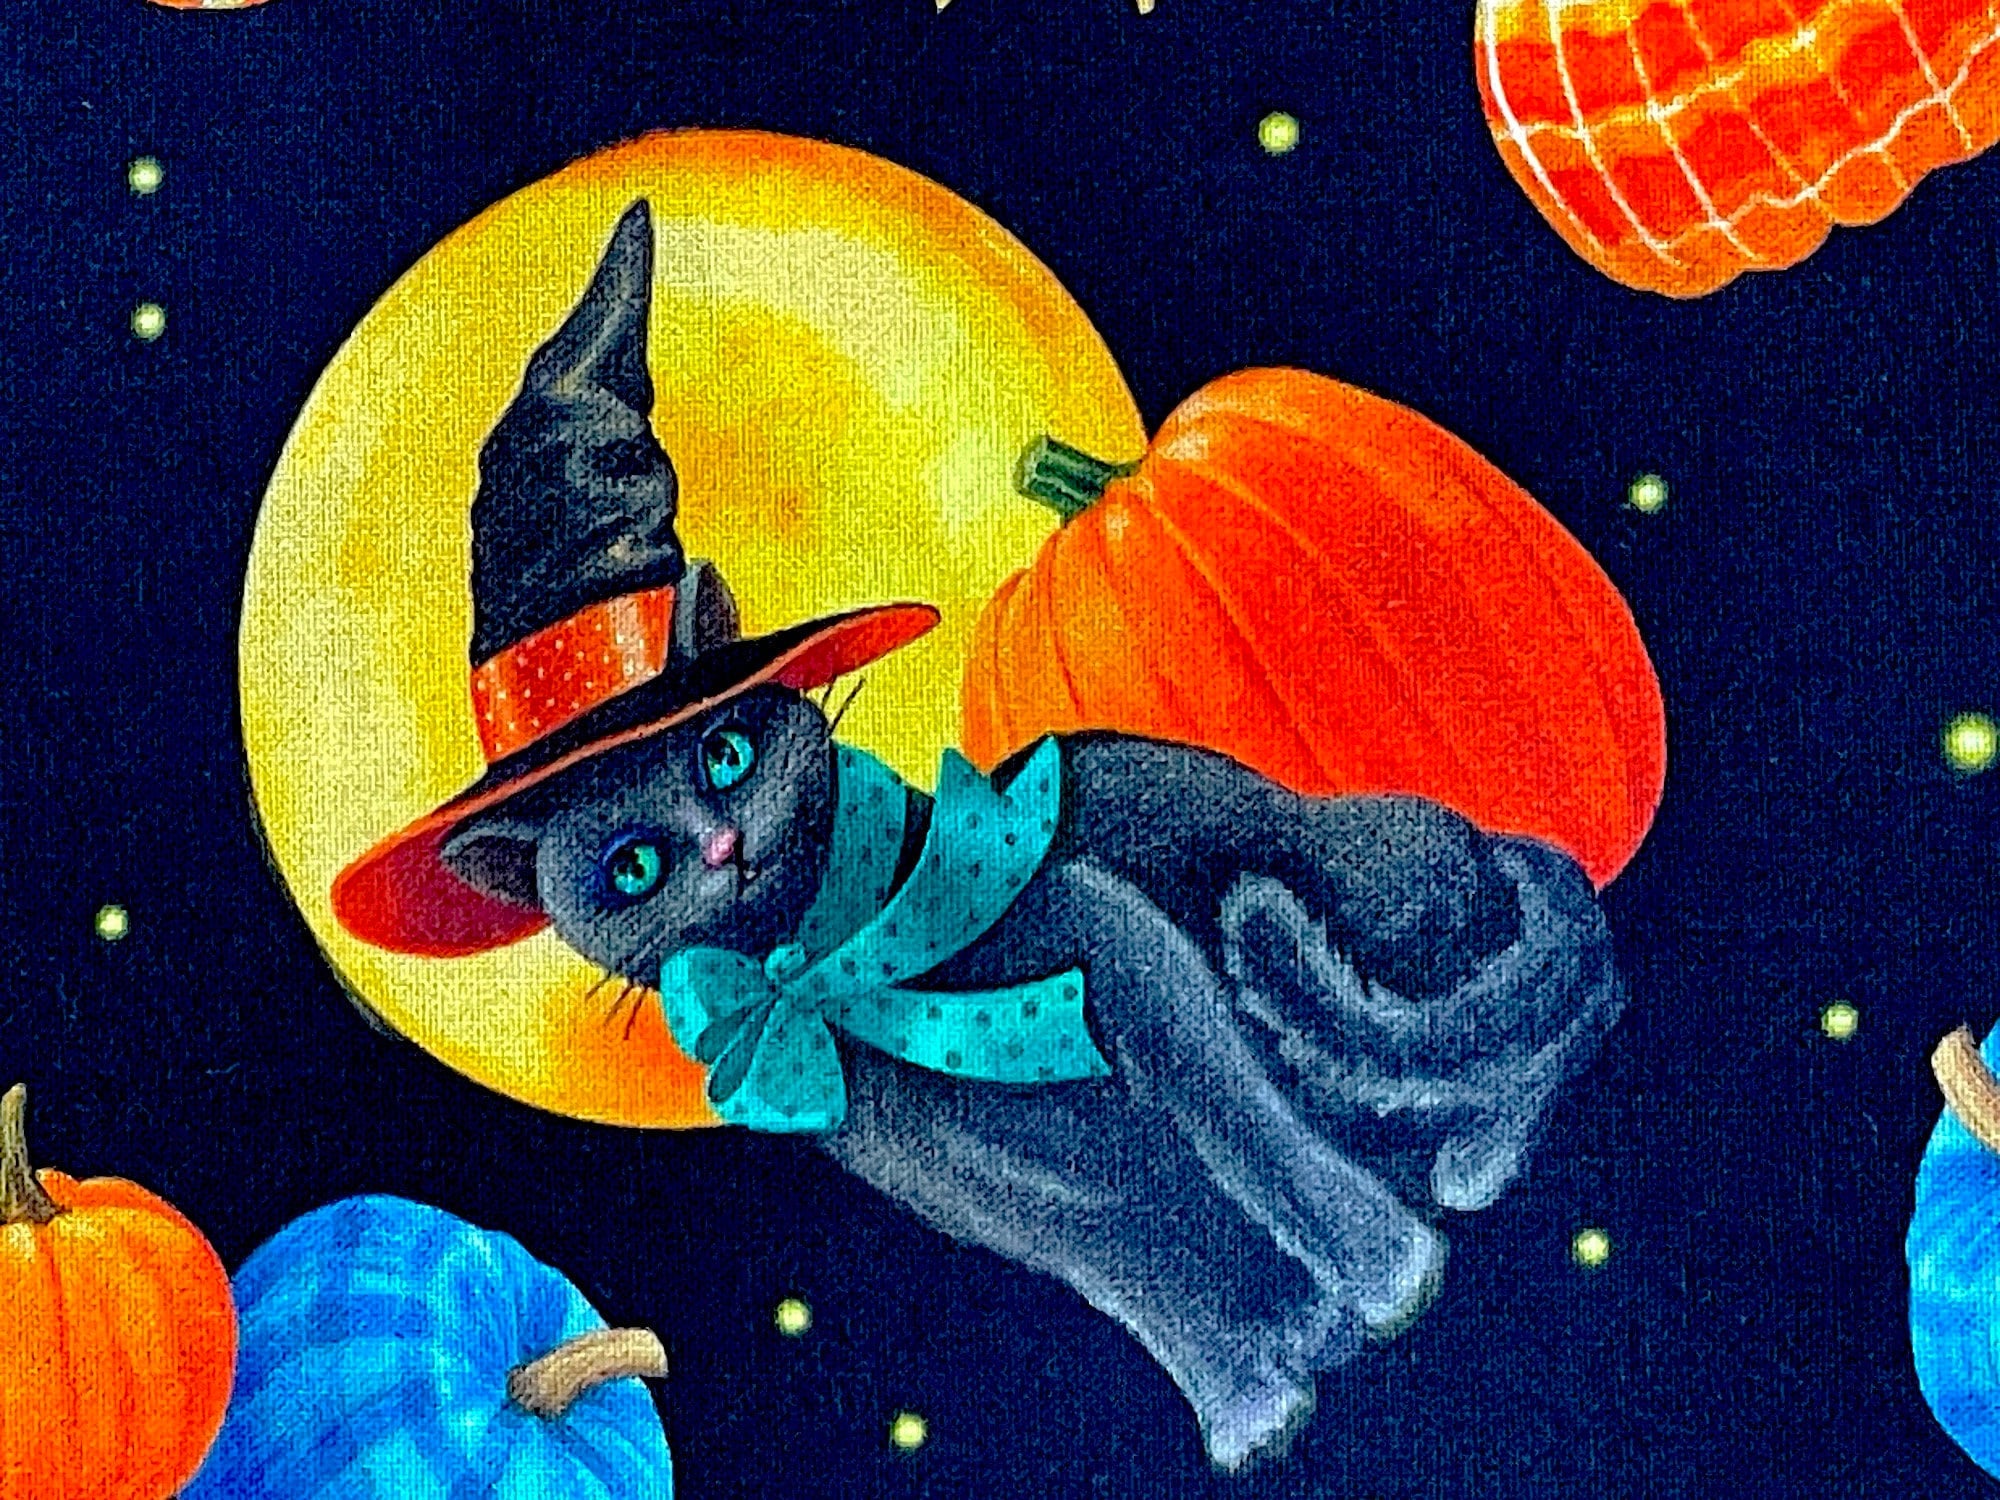 Close up of a black cat sitting in front of a pumpkin and a full moon.